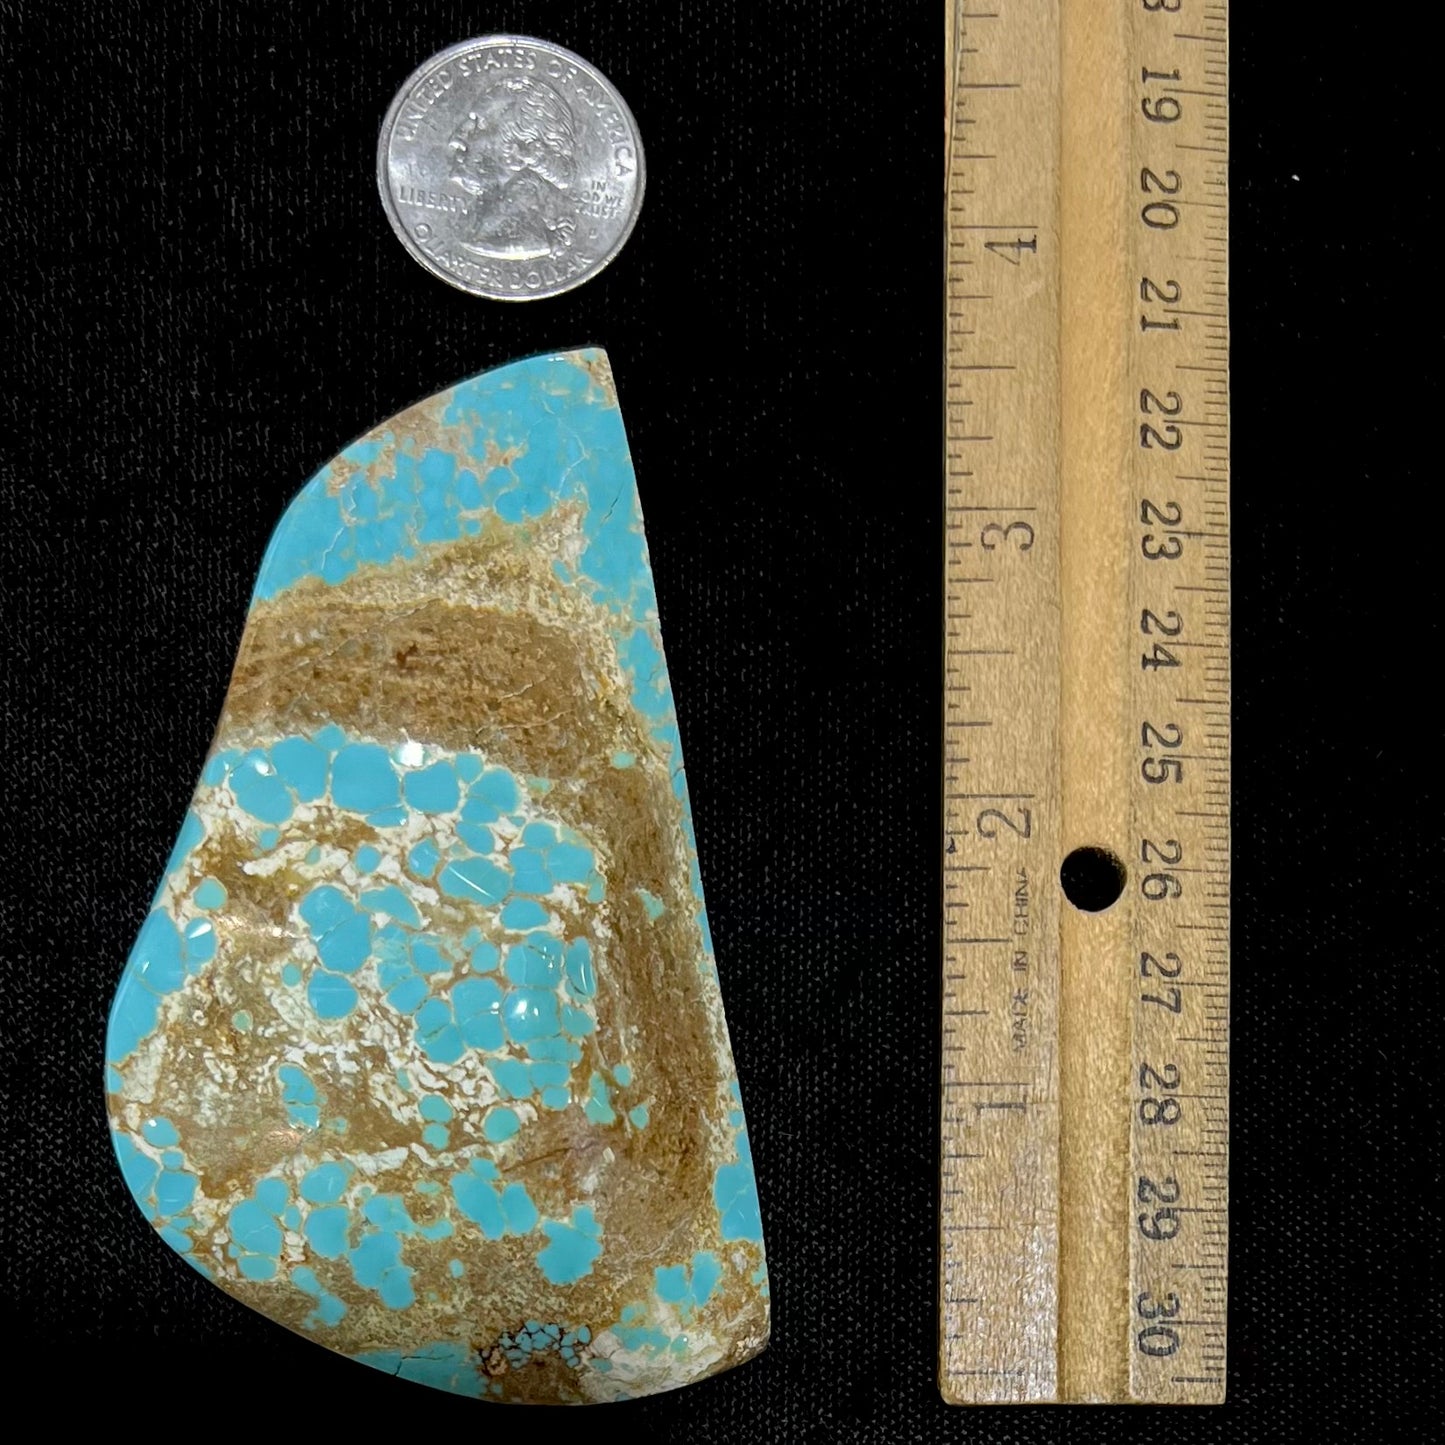 A large, polished turquoise specimen from the Cripple Creek mine.